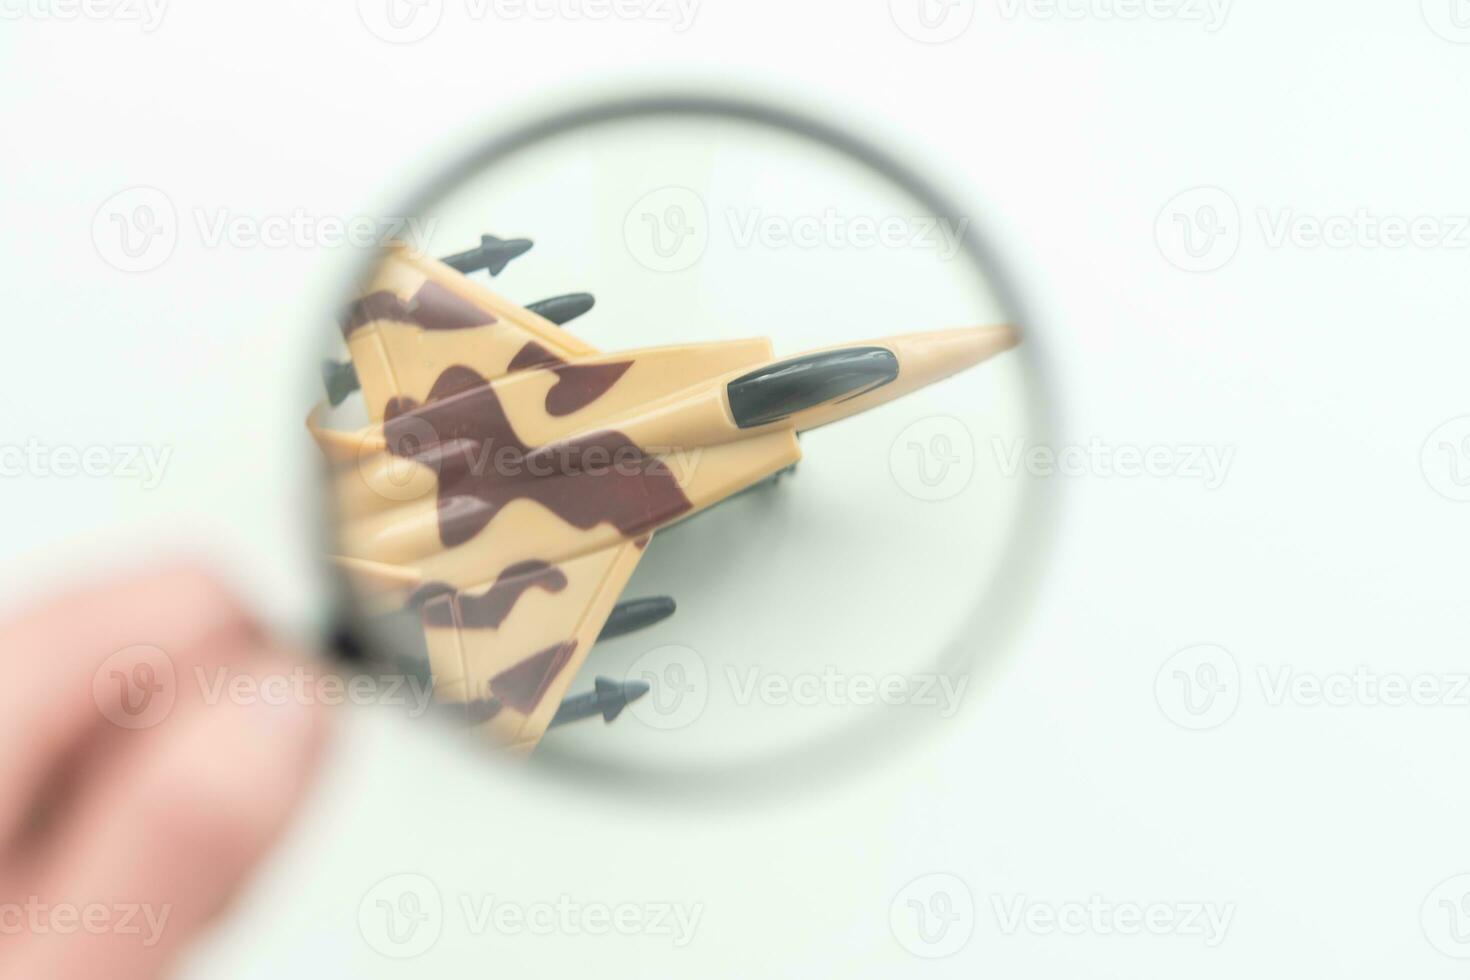 Review airlines company service and tickets price concept. Airplane model under magnifying glass on grey background. photo